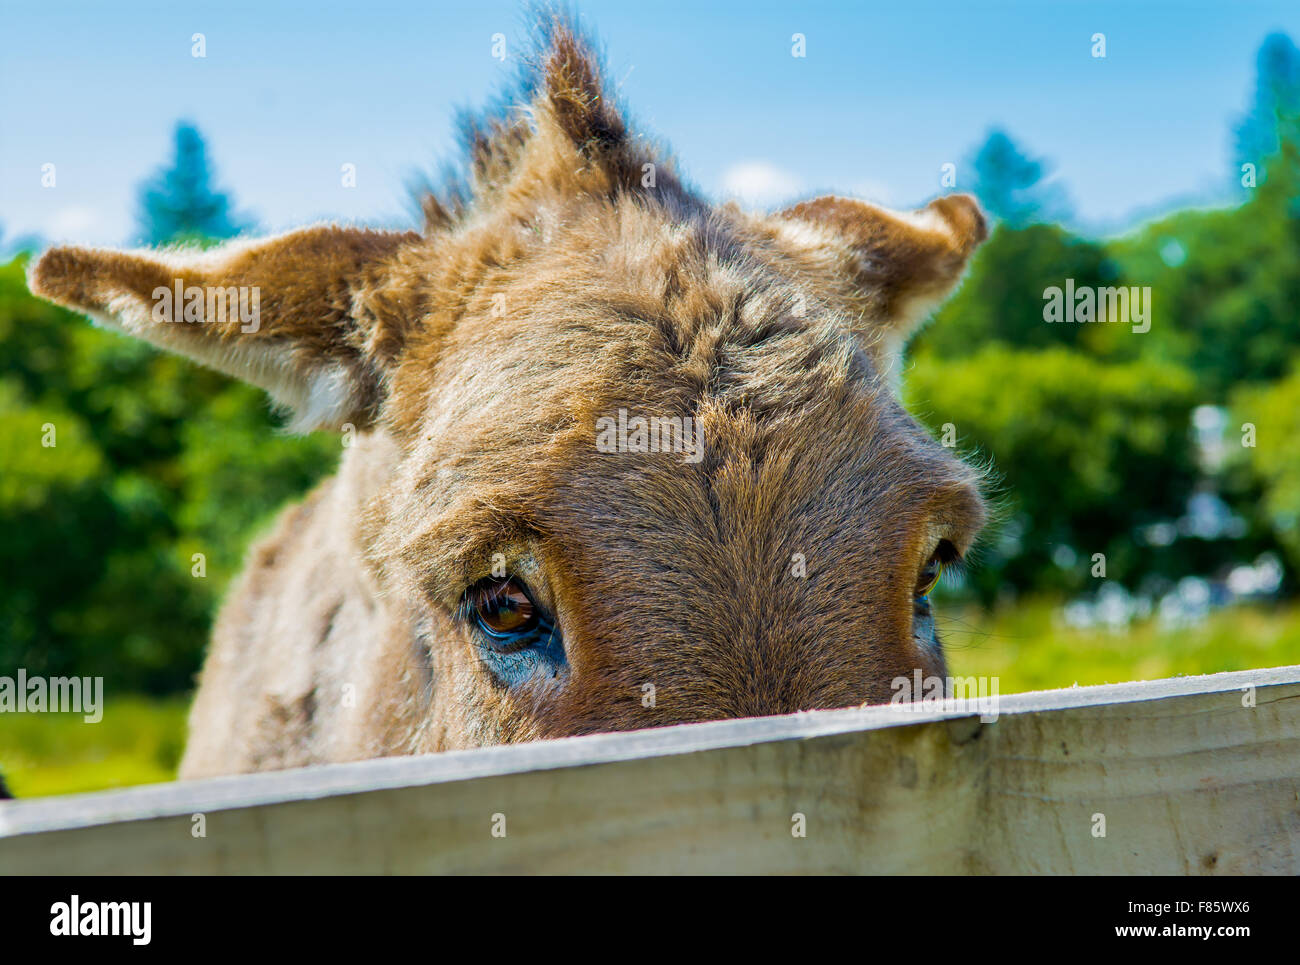 Shy Donkey Behind A Wooden Fence Stock Photo